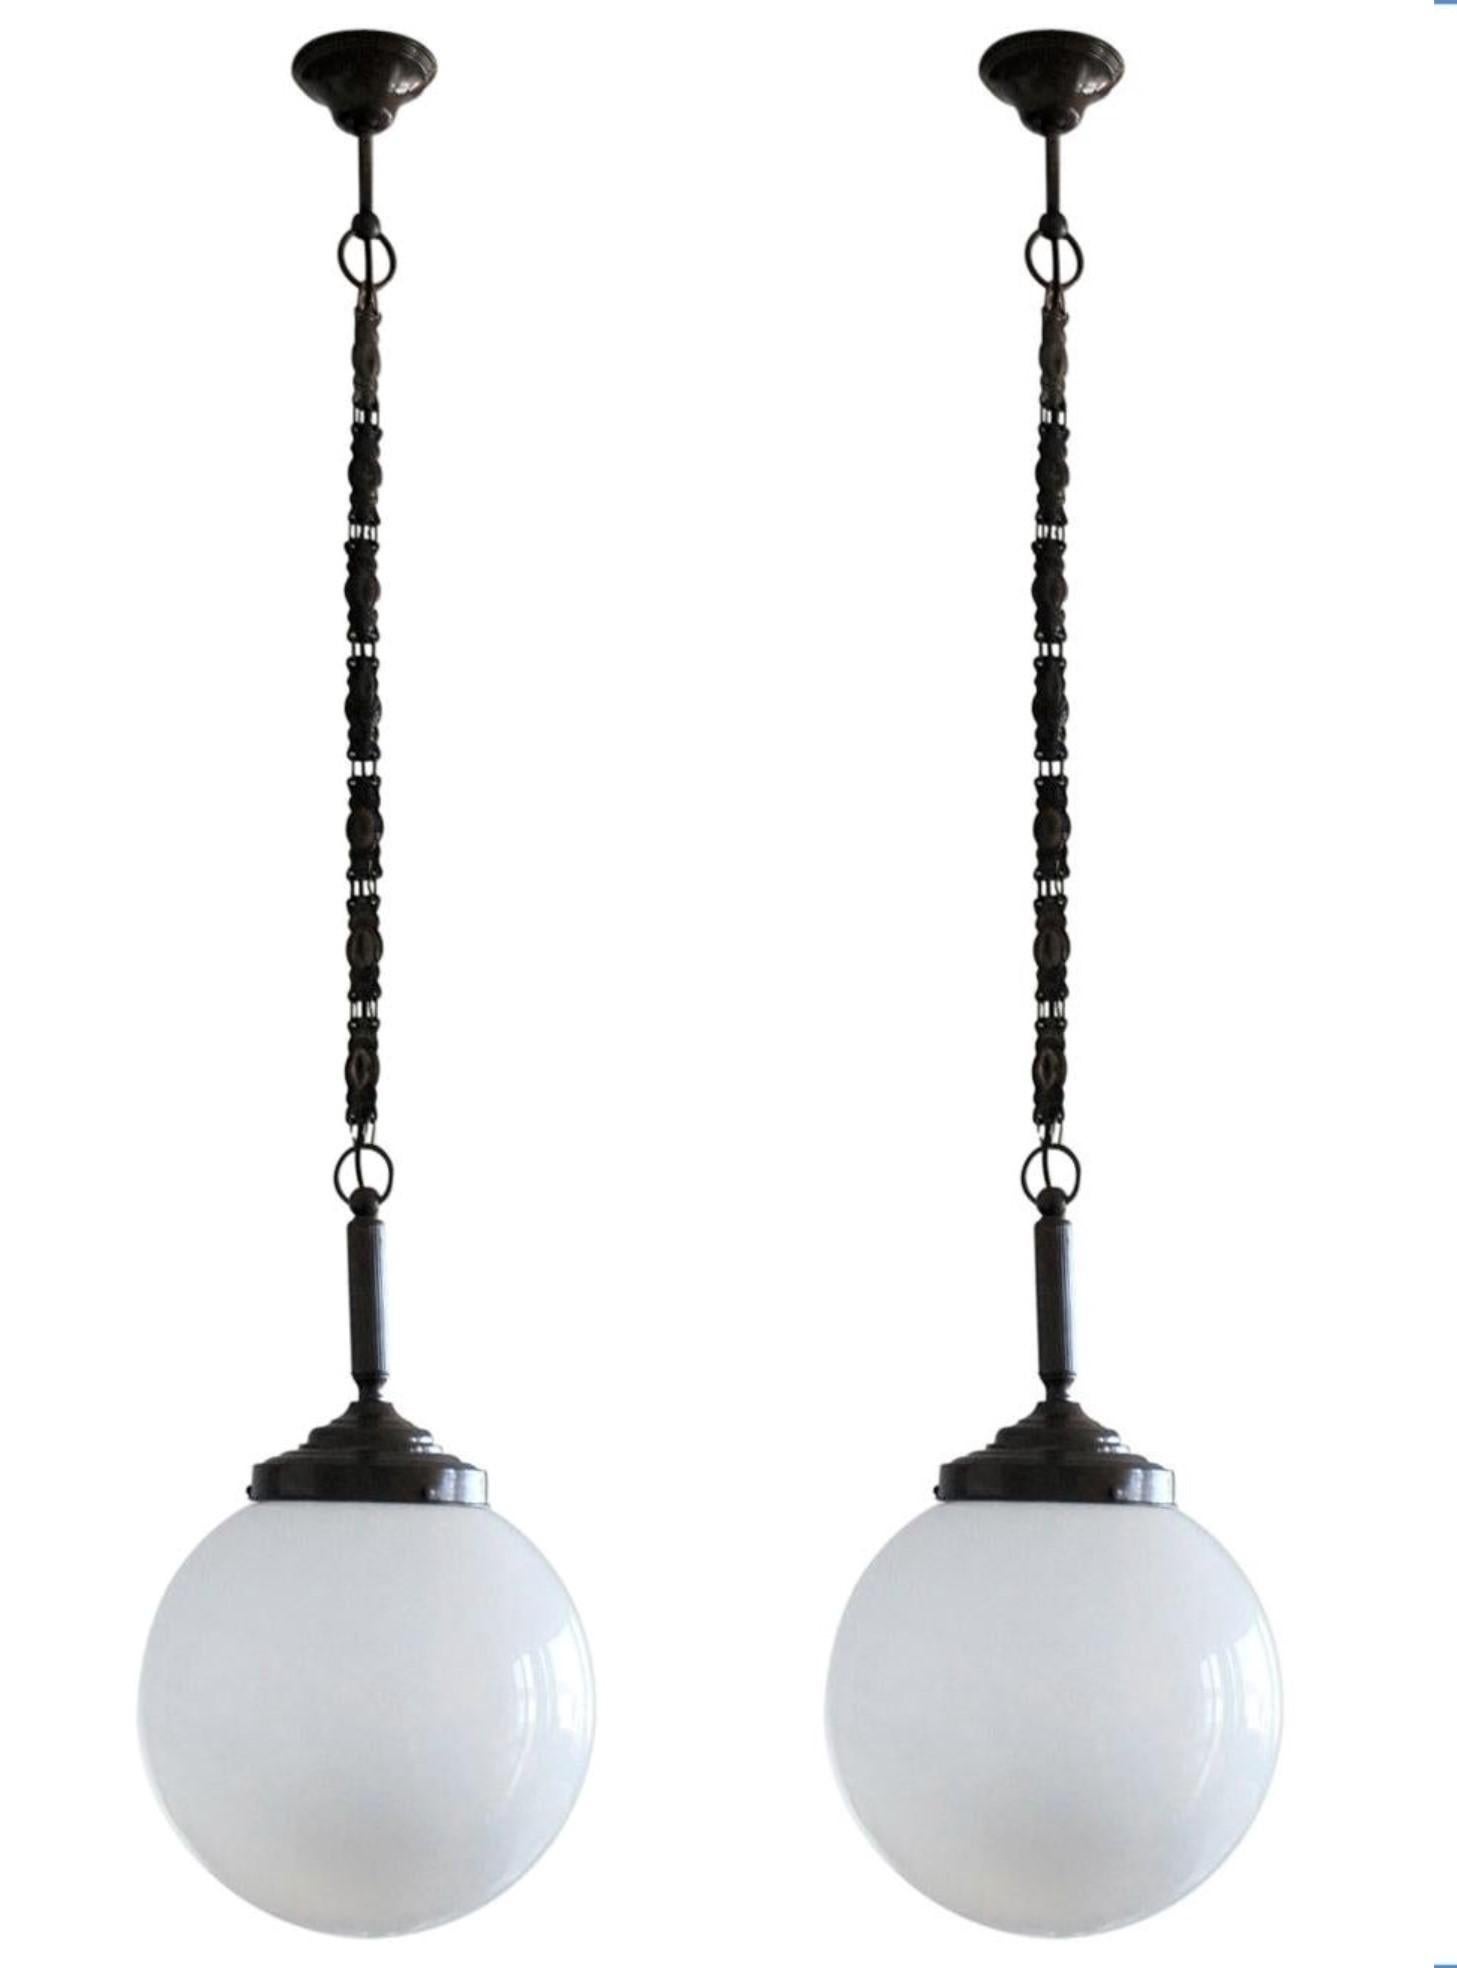 A set of three hand blown opaline glass ball Theatre pendants with burnished brass mounts, chain and canopy, Italy, 1930-1939. With a single Edison E27 light socket for a large sized srew base bulb up to 100W. LED bulbs can also be used. All three